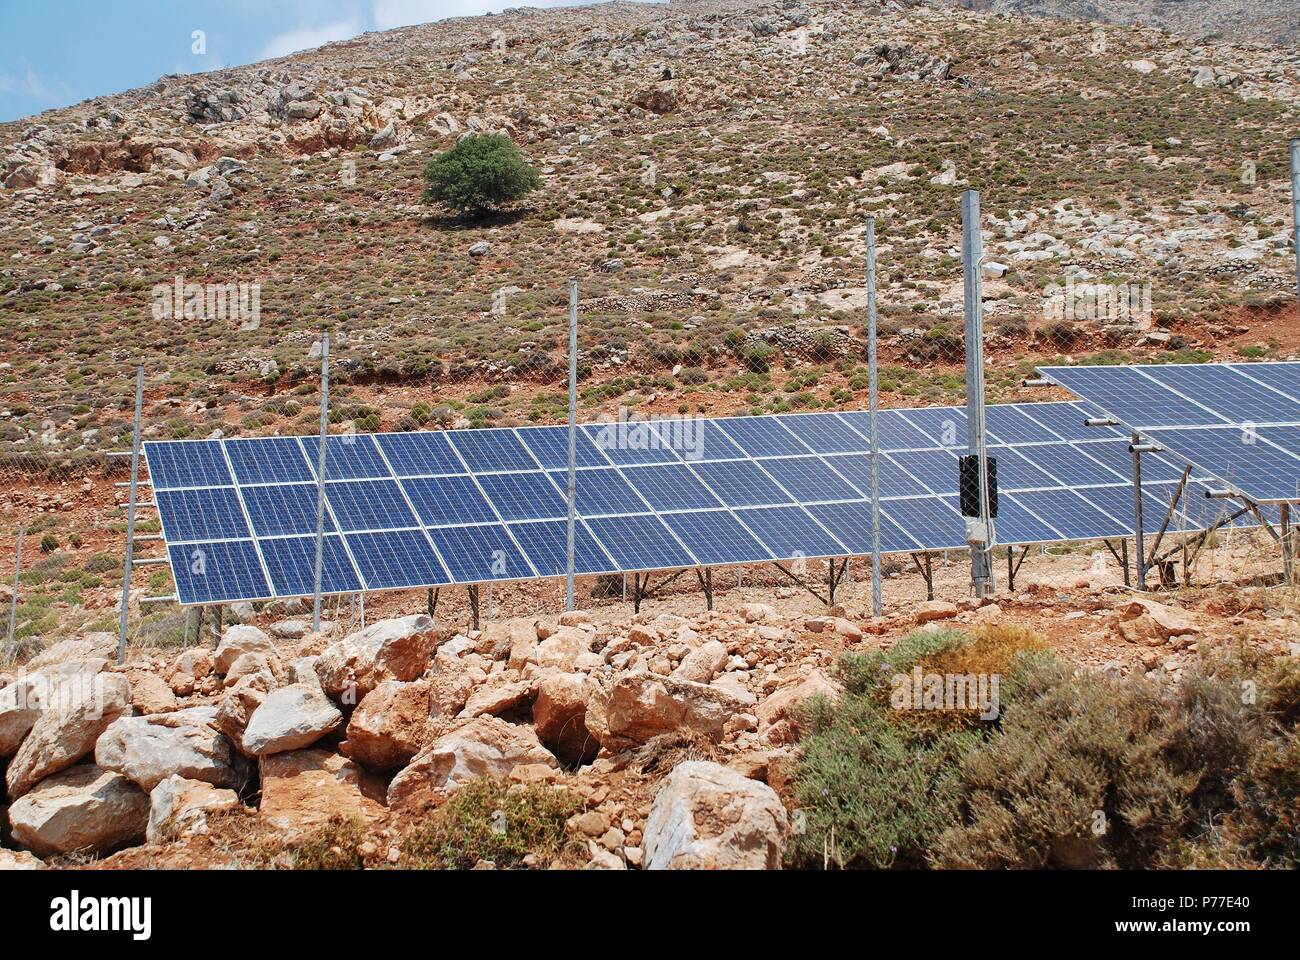 The solar power station on the Greek island of Tilos on June 20, 2018. The island aims to become self sufficient in power through renewable energy. Stock Photo